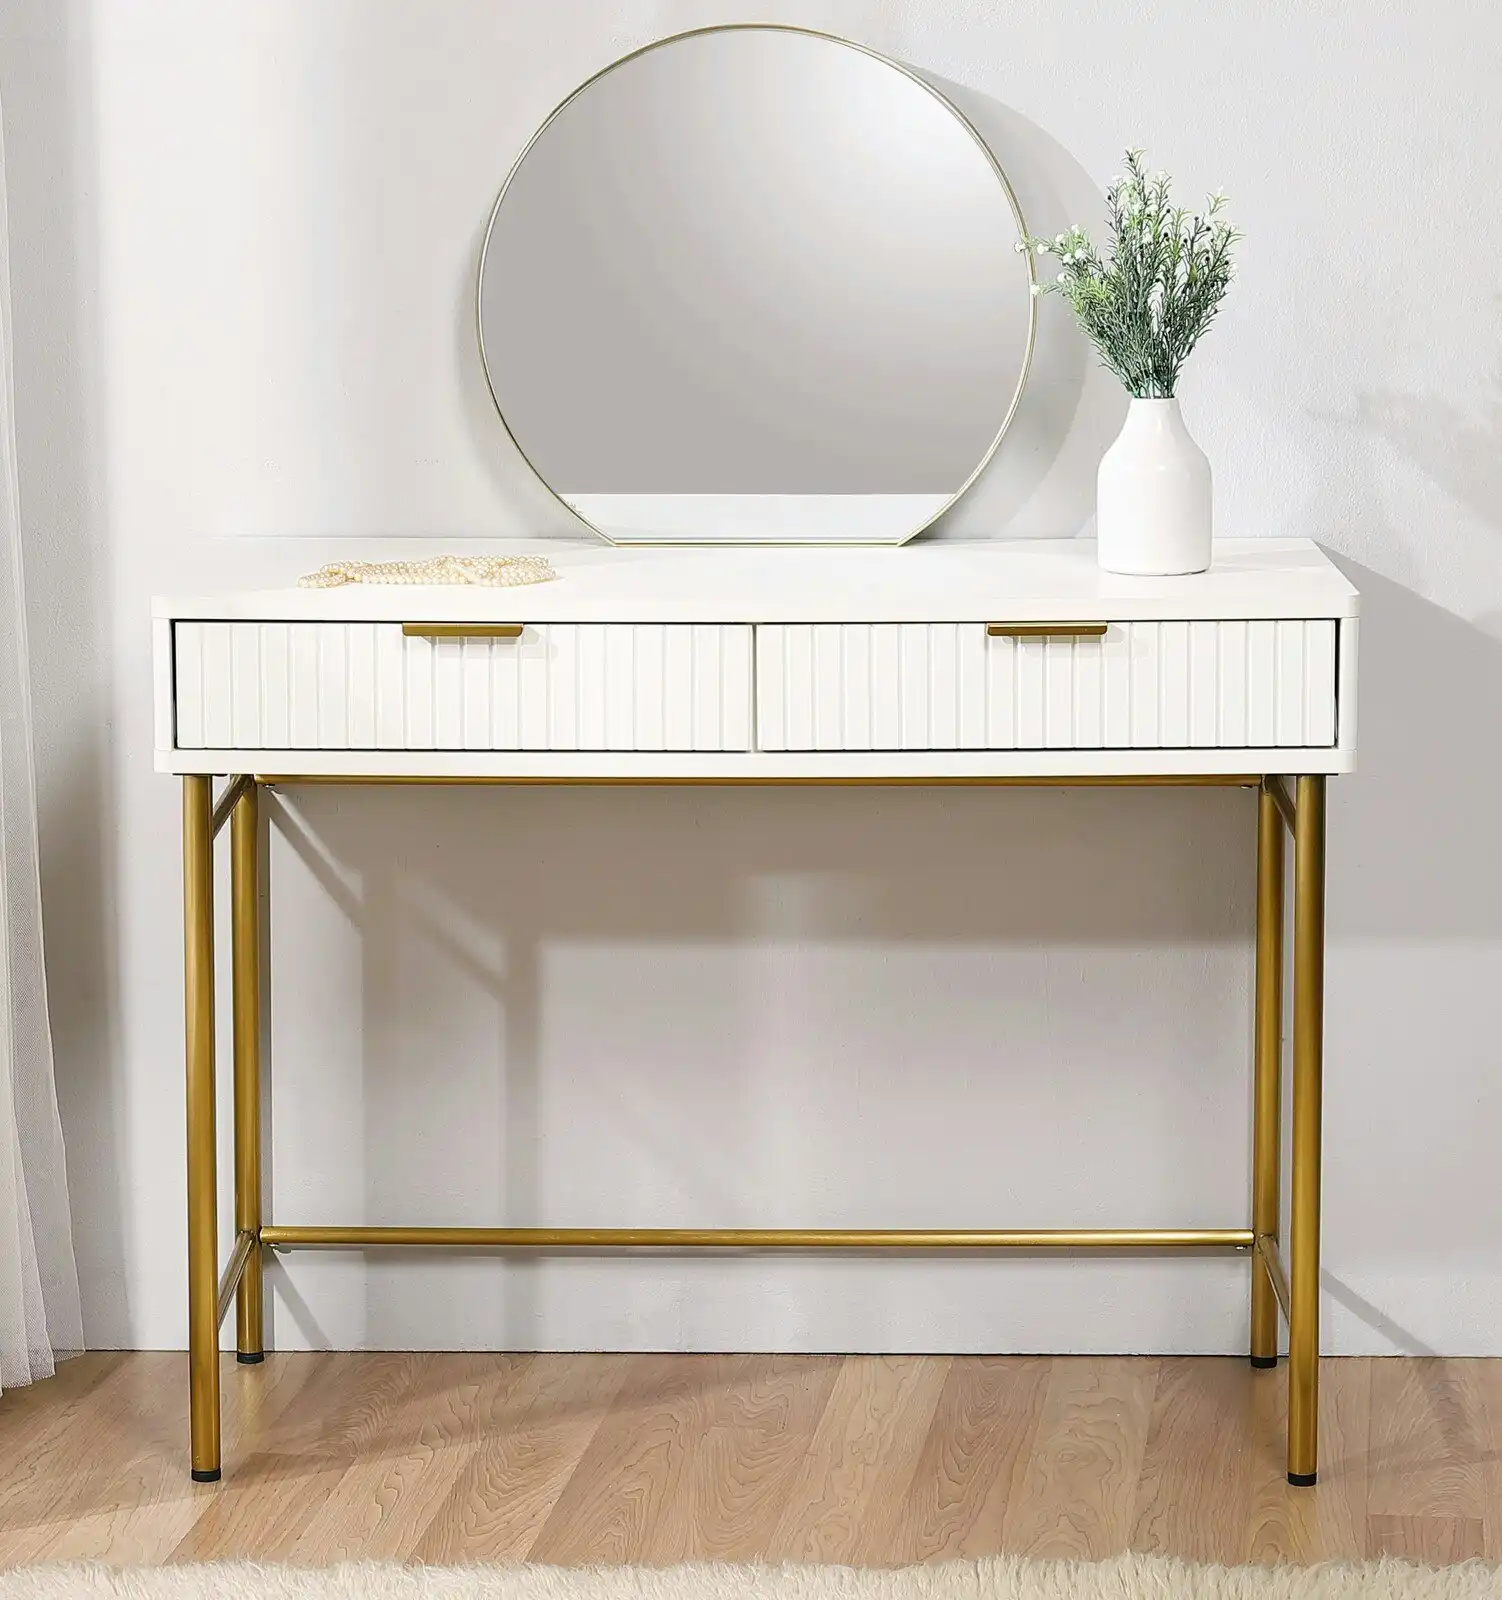 Cora Dressing Table with Mirror 2 Drawers Metal Brushed Gold Handles and Legs